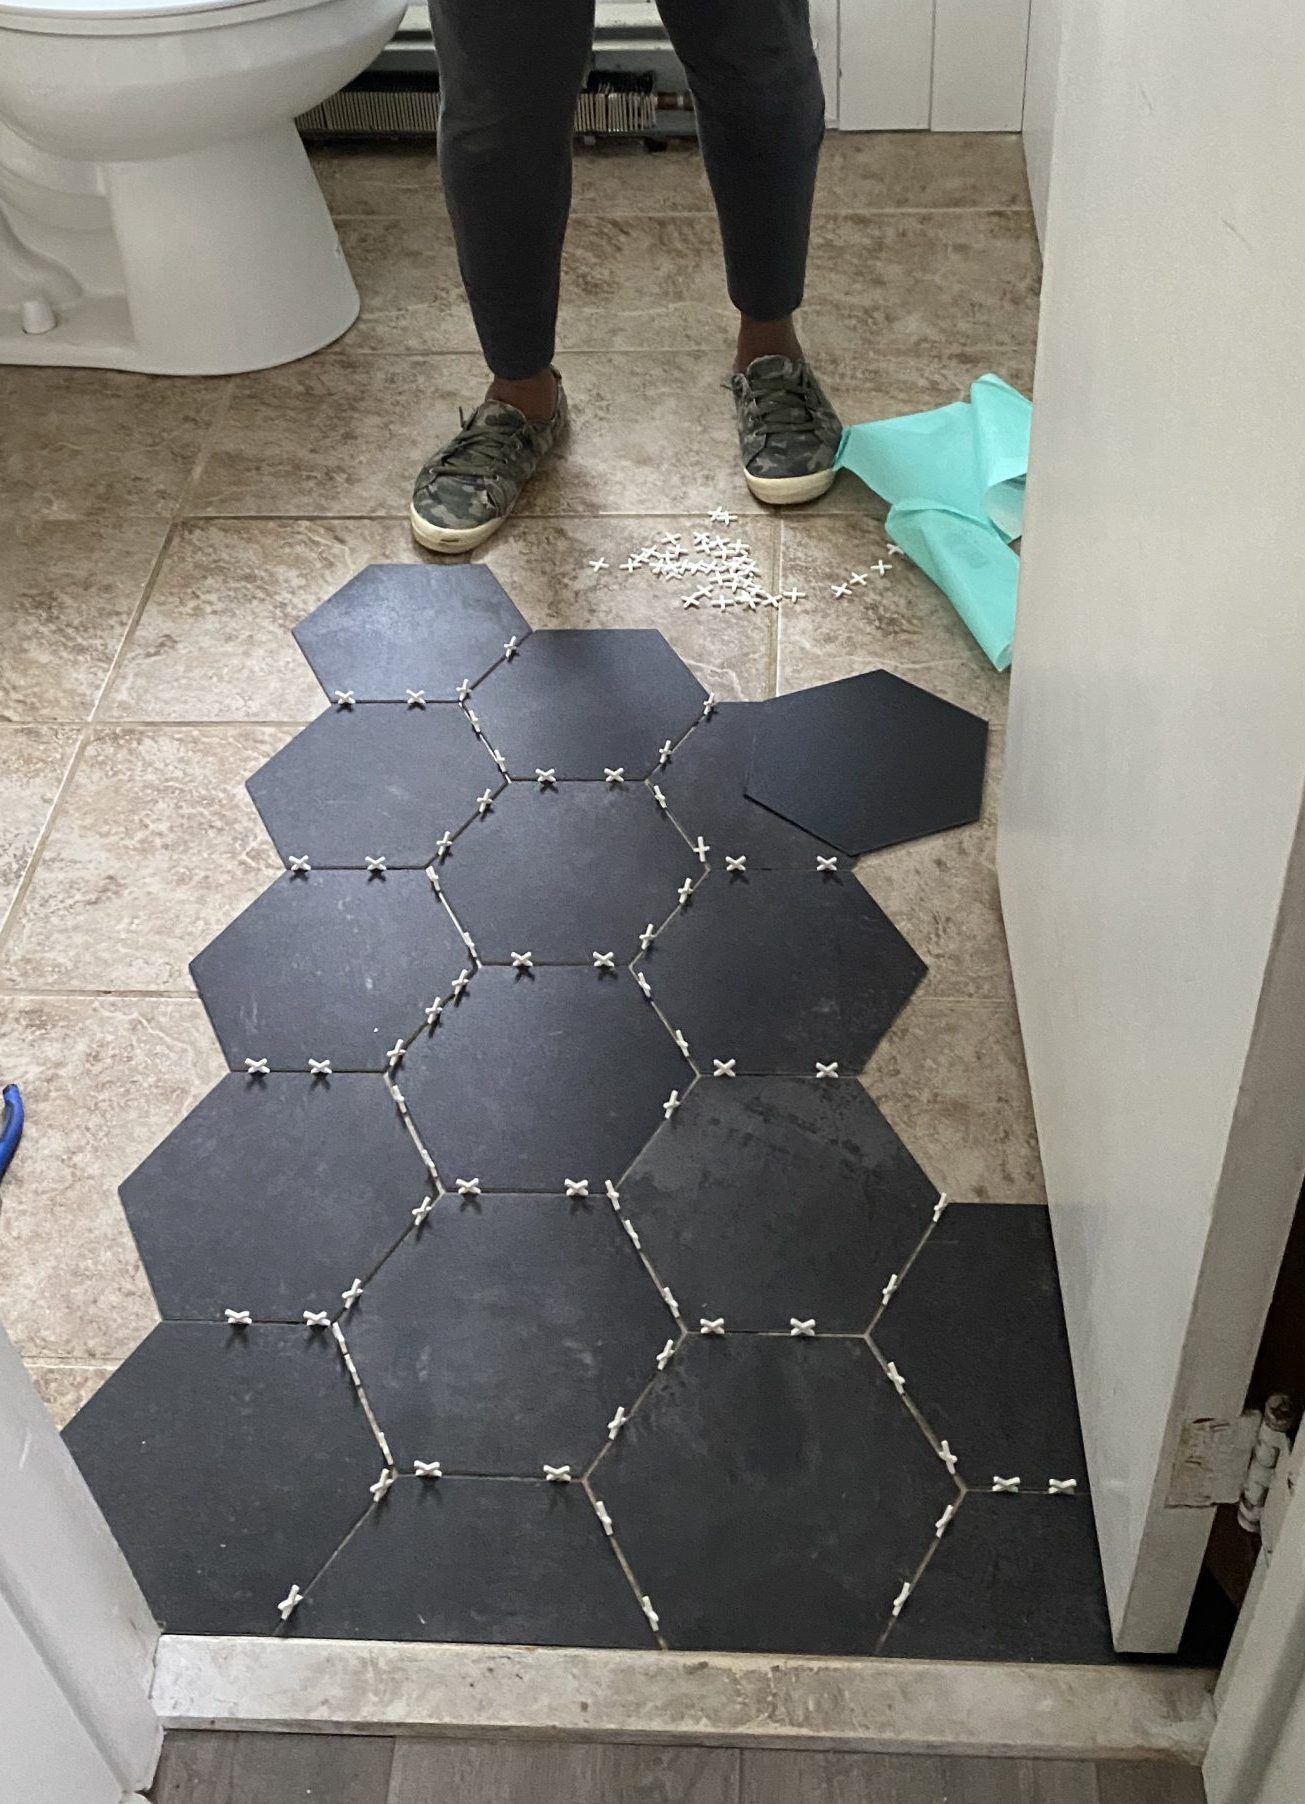 Why to use vinyl tile flooring?